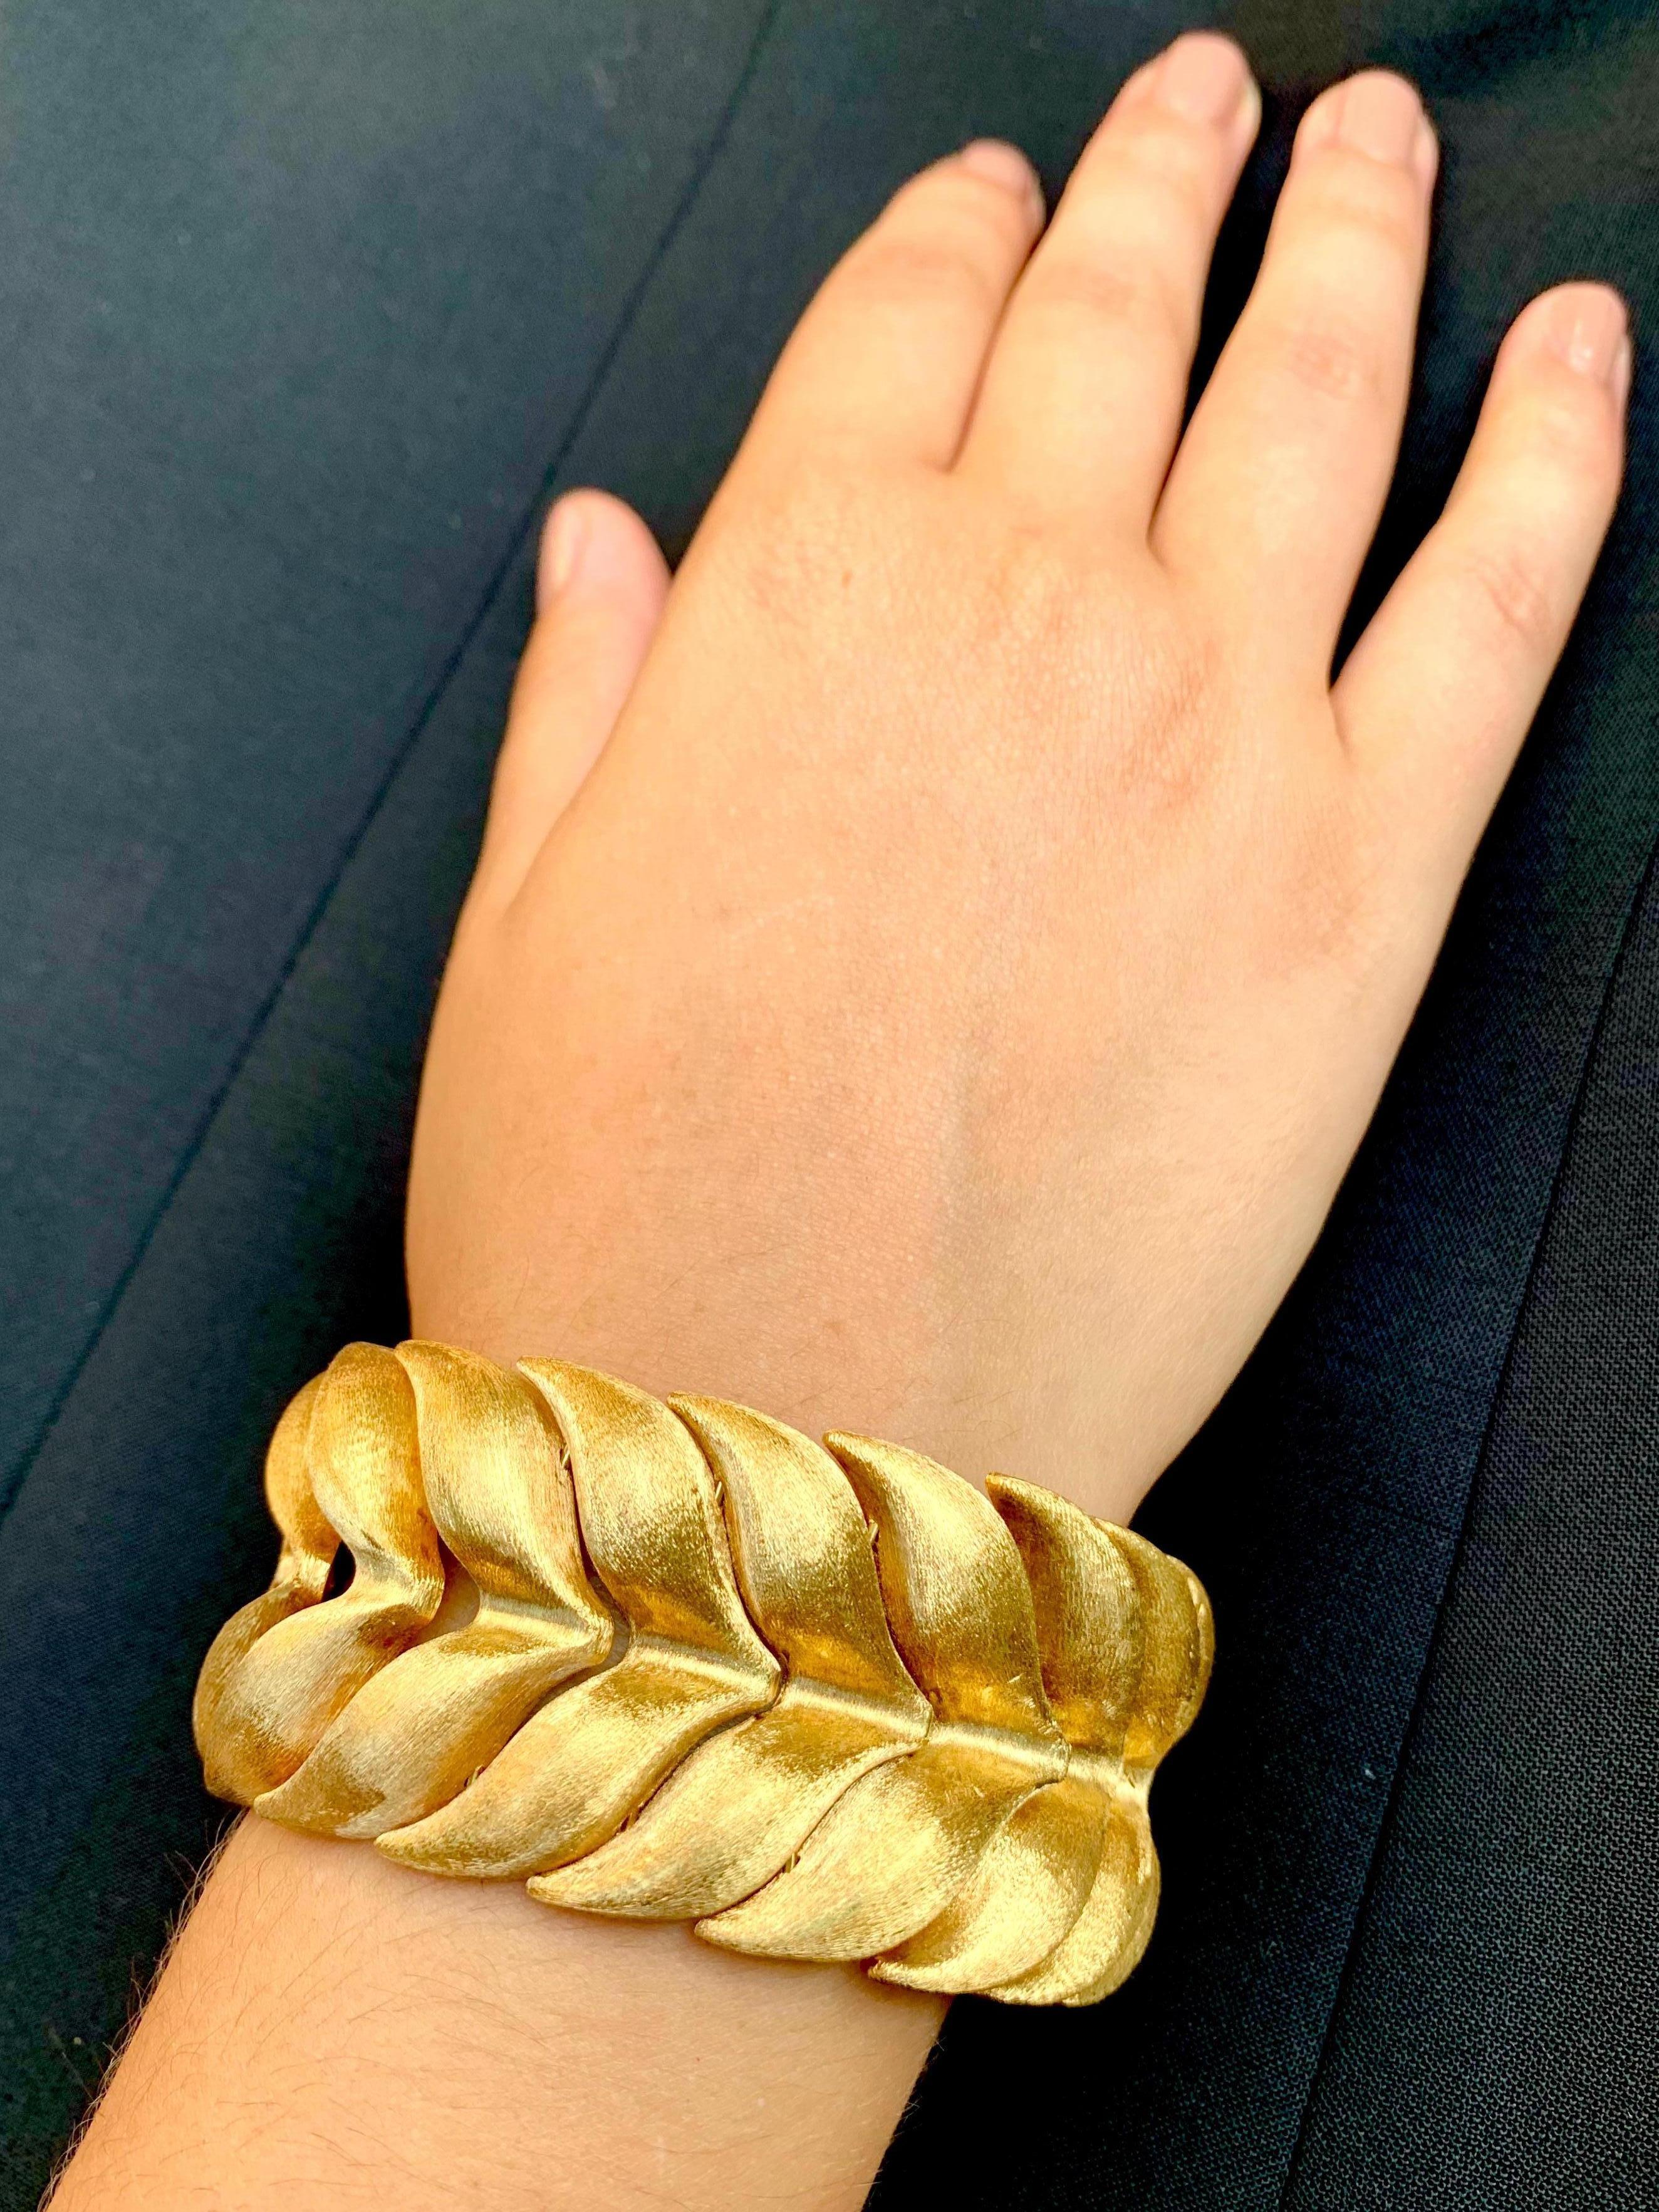 Fabulous, massive 18K yellow gold cuff statement bracelet in the Rigato technique, synonymous with fine Italian craftsmanship
1970's
The Rigato technique is a type of egraving which incorporates minute parallel lines to produce a textured effect